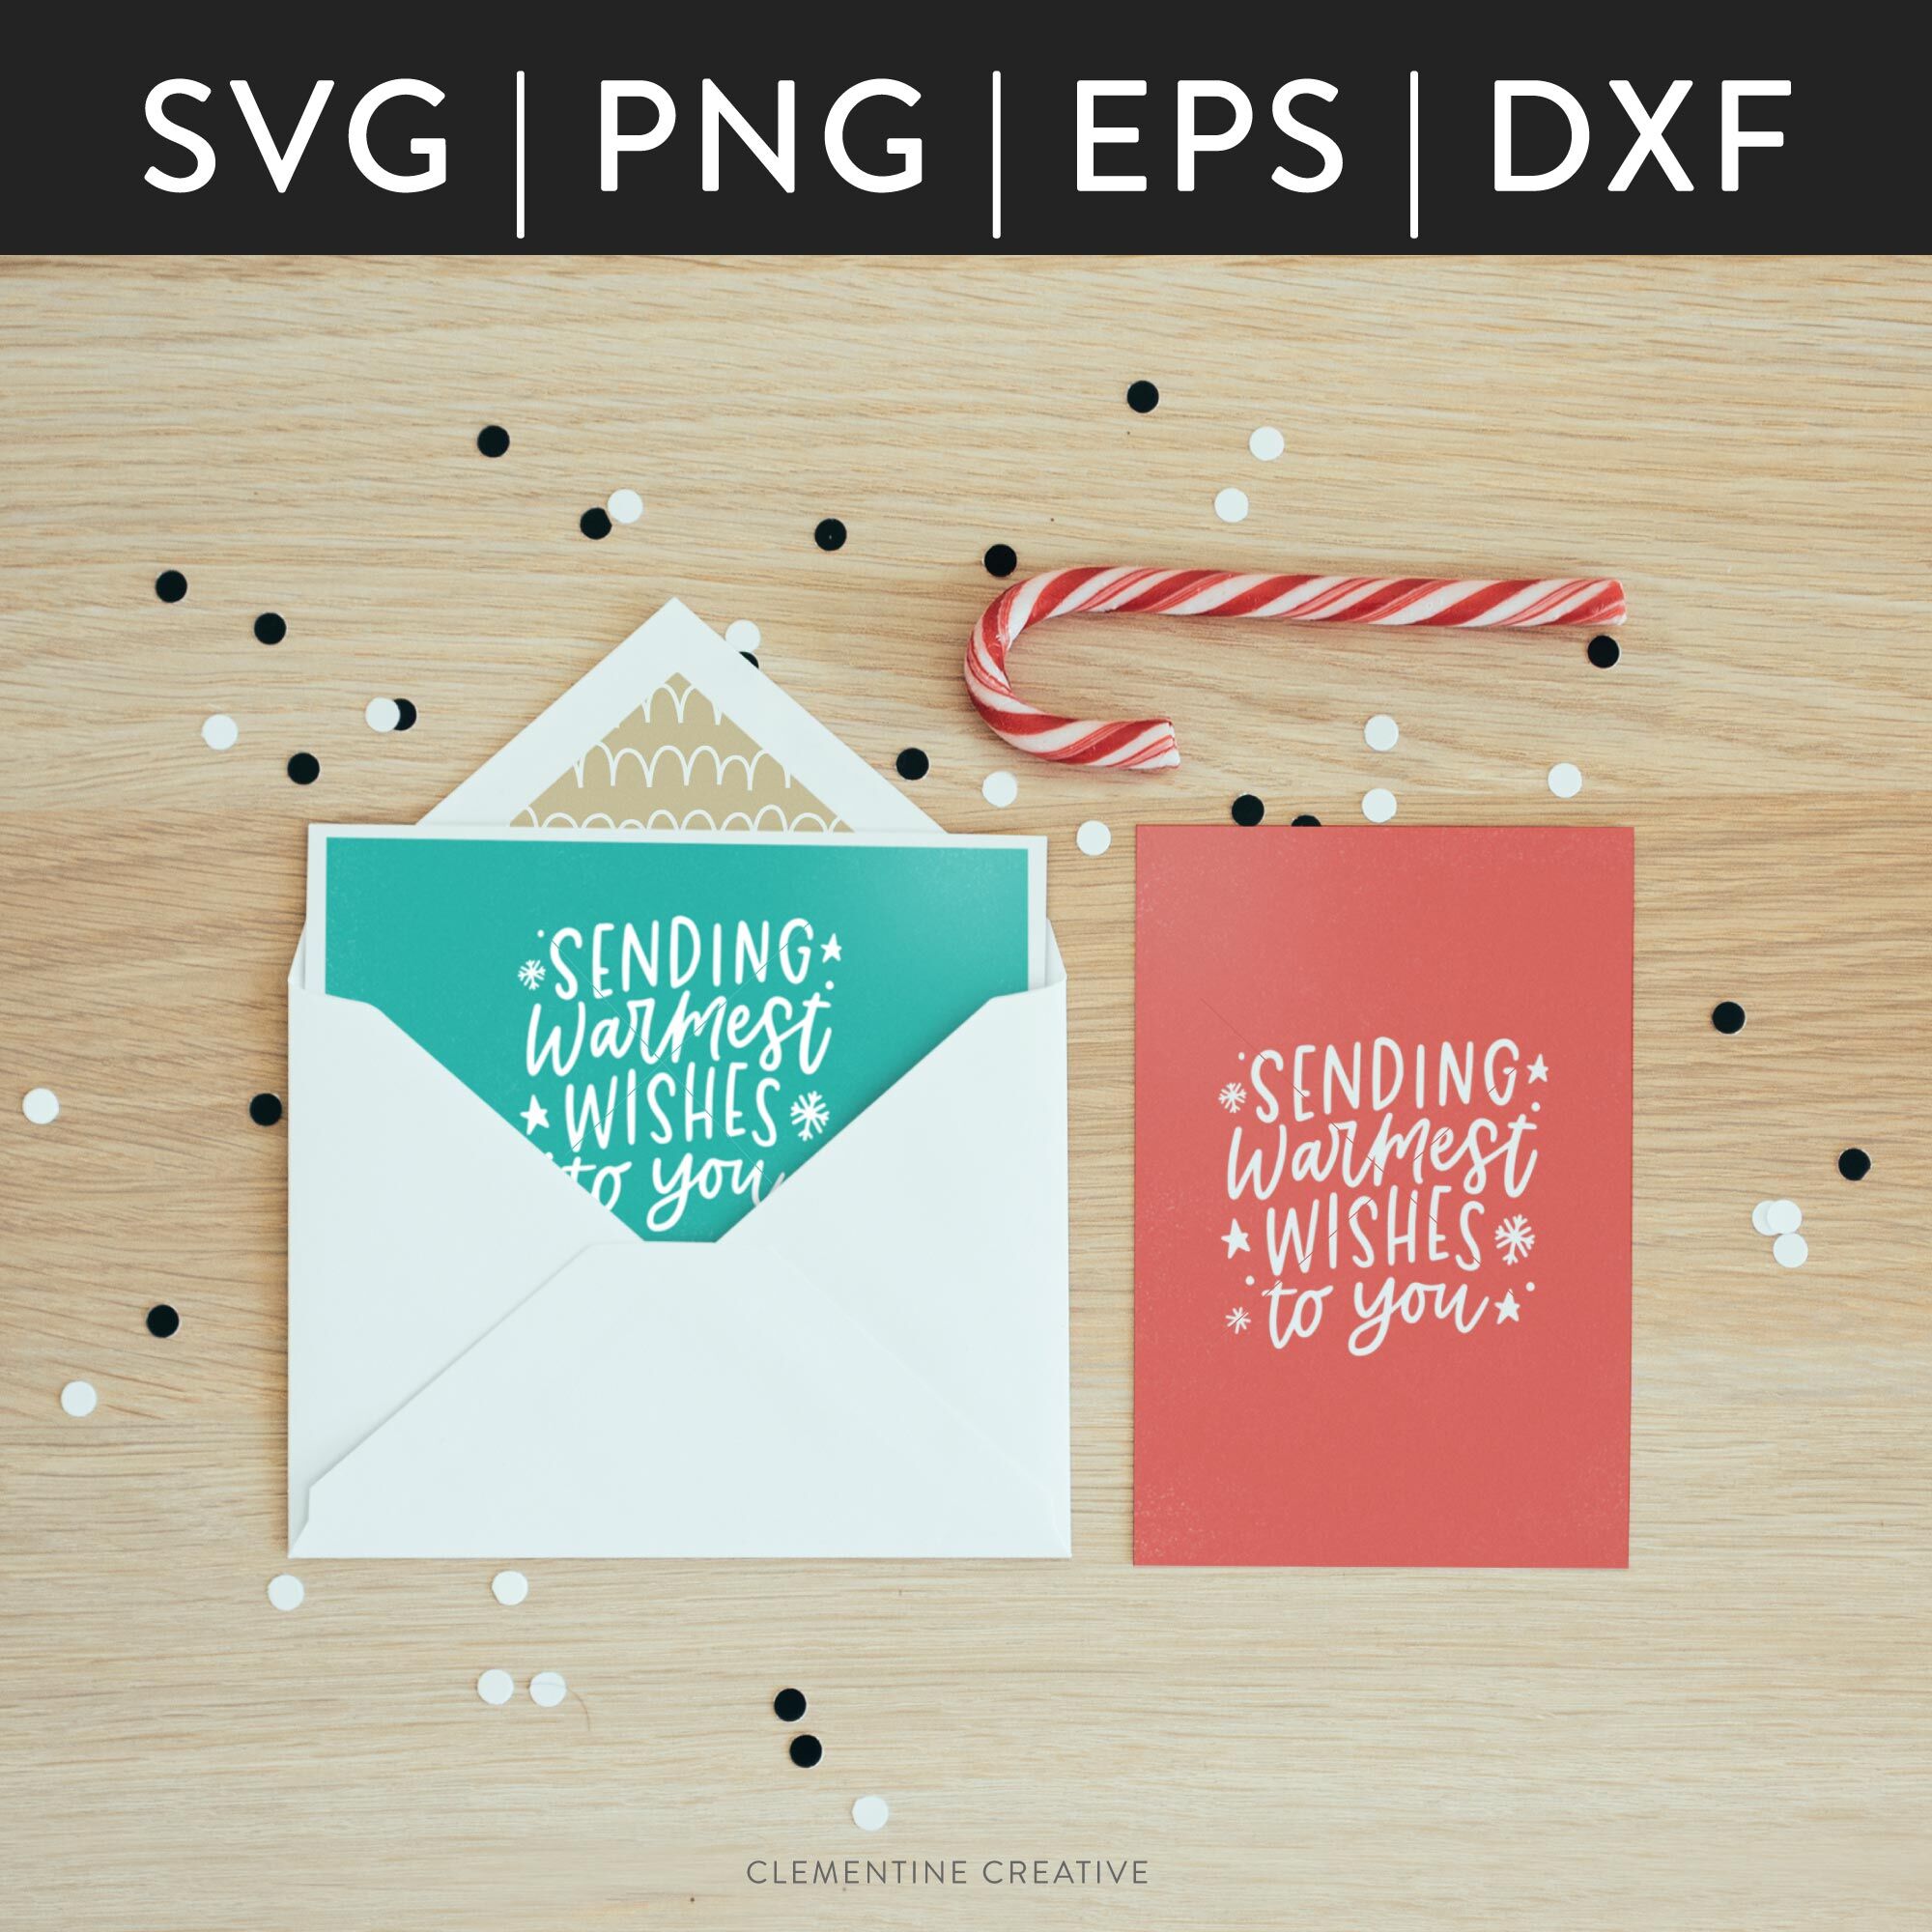 Christmas Svg Cutting Files Warmest Wishes Svg Holiday Wishes Svg By Clementine Creative Thehungryjpeg Com